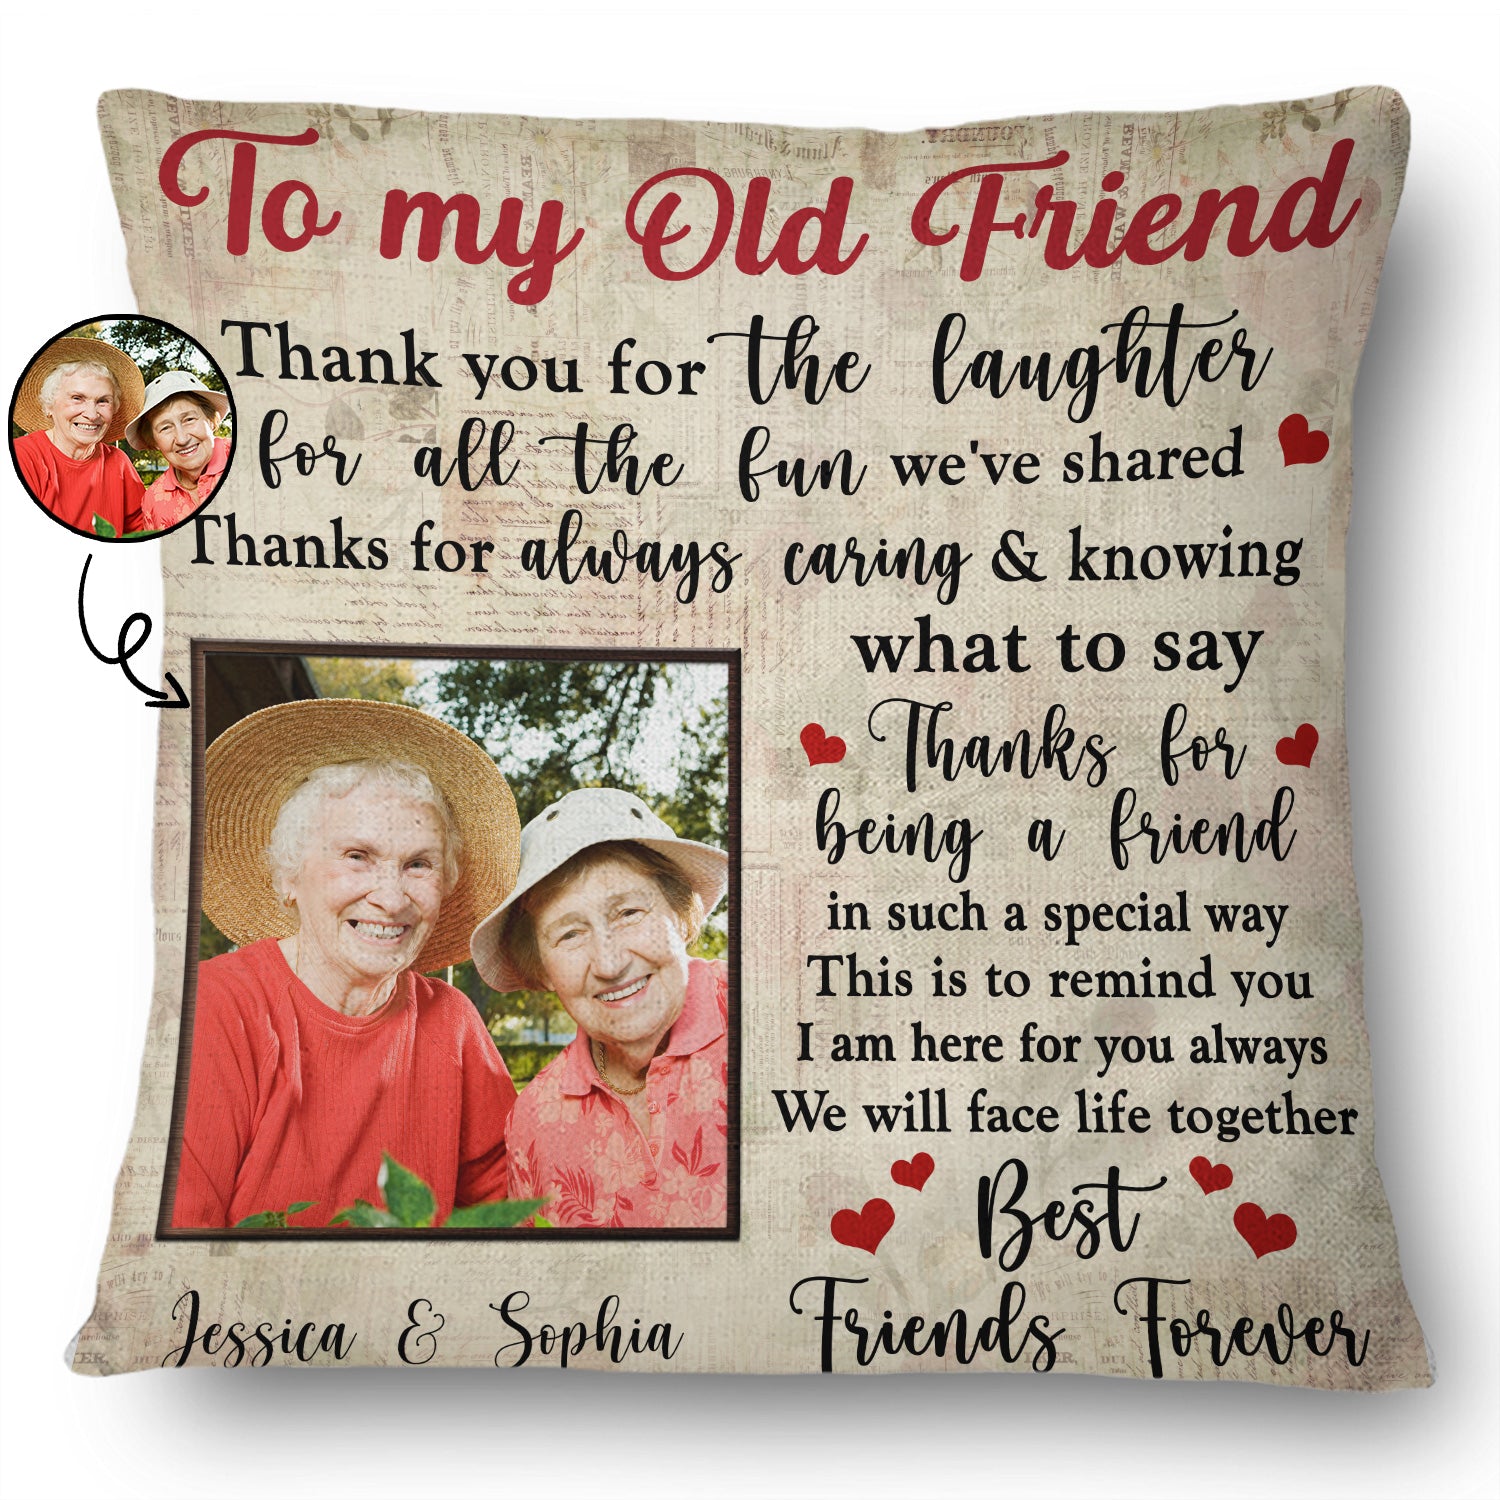 Custom Photo Besties To My Old Friend Pillow - Gift For BFF Best Friends - Personalized Custom Pillow